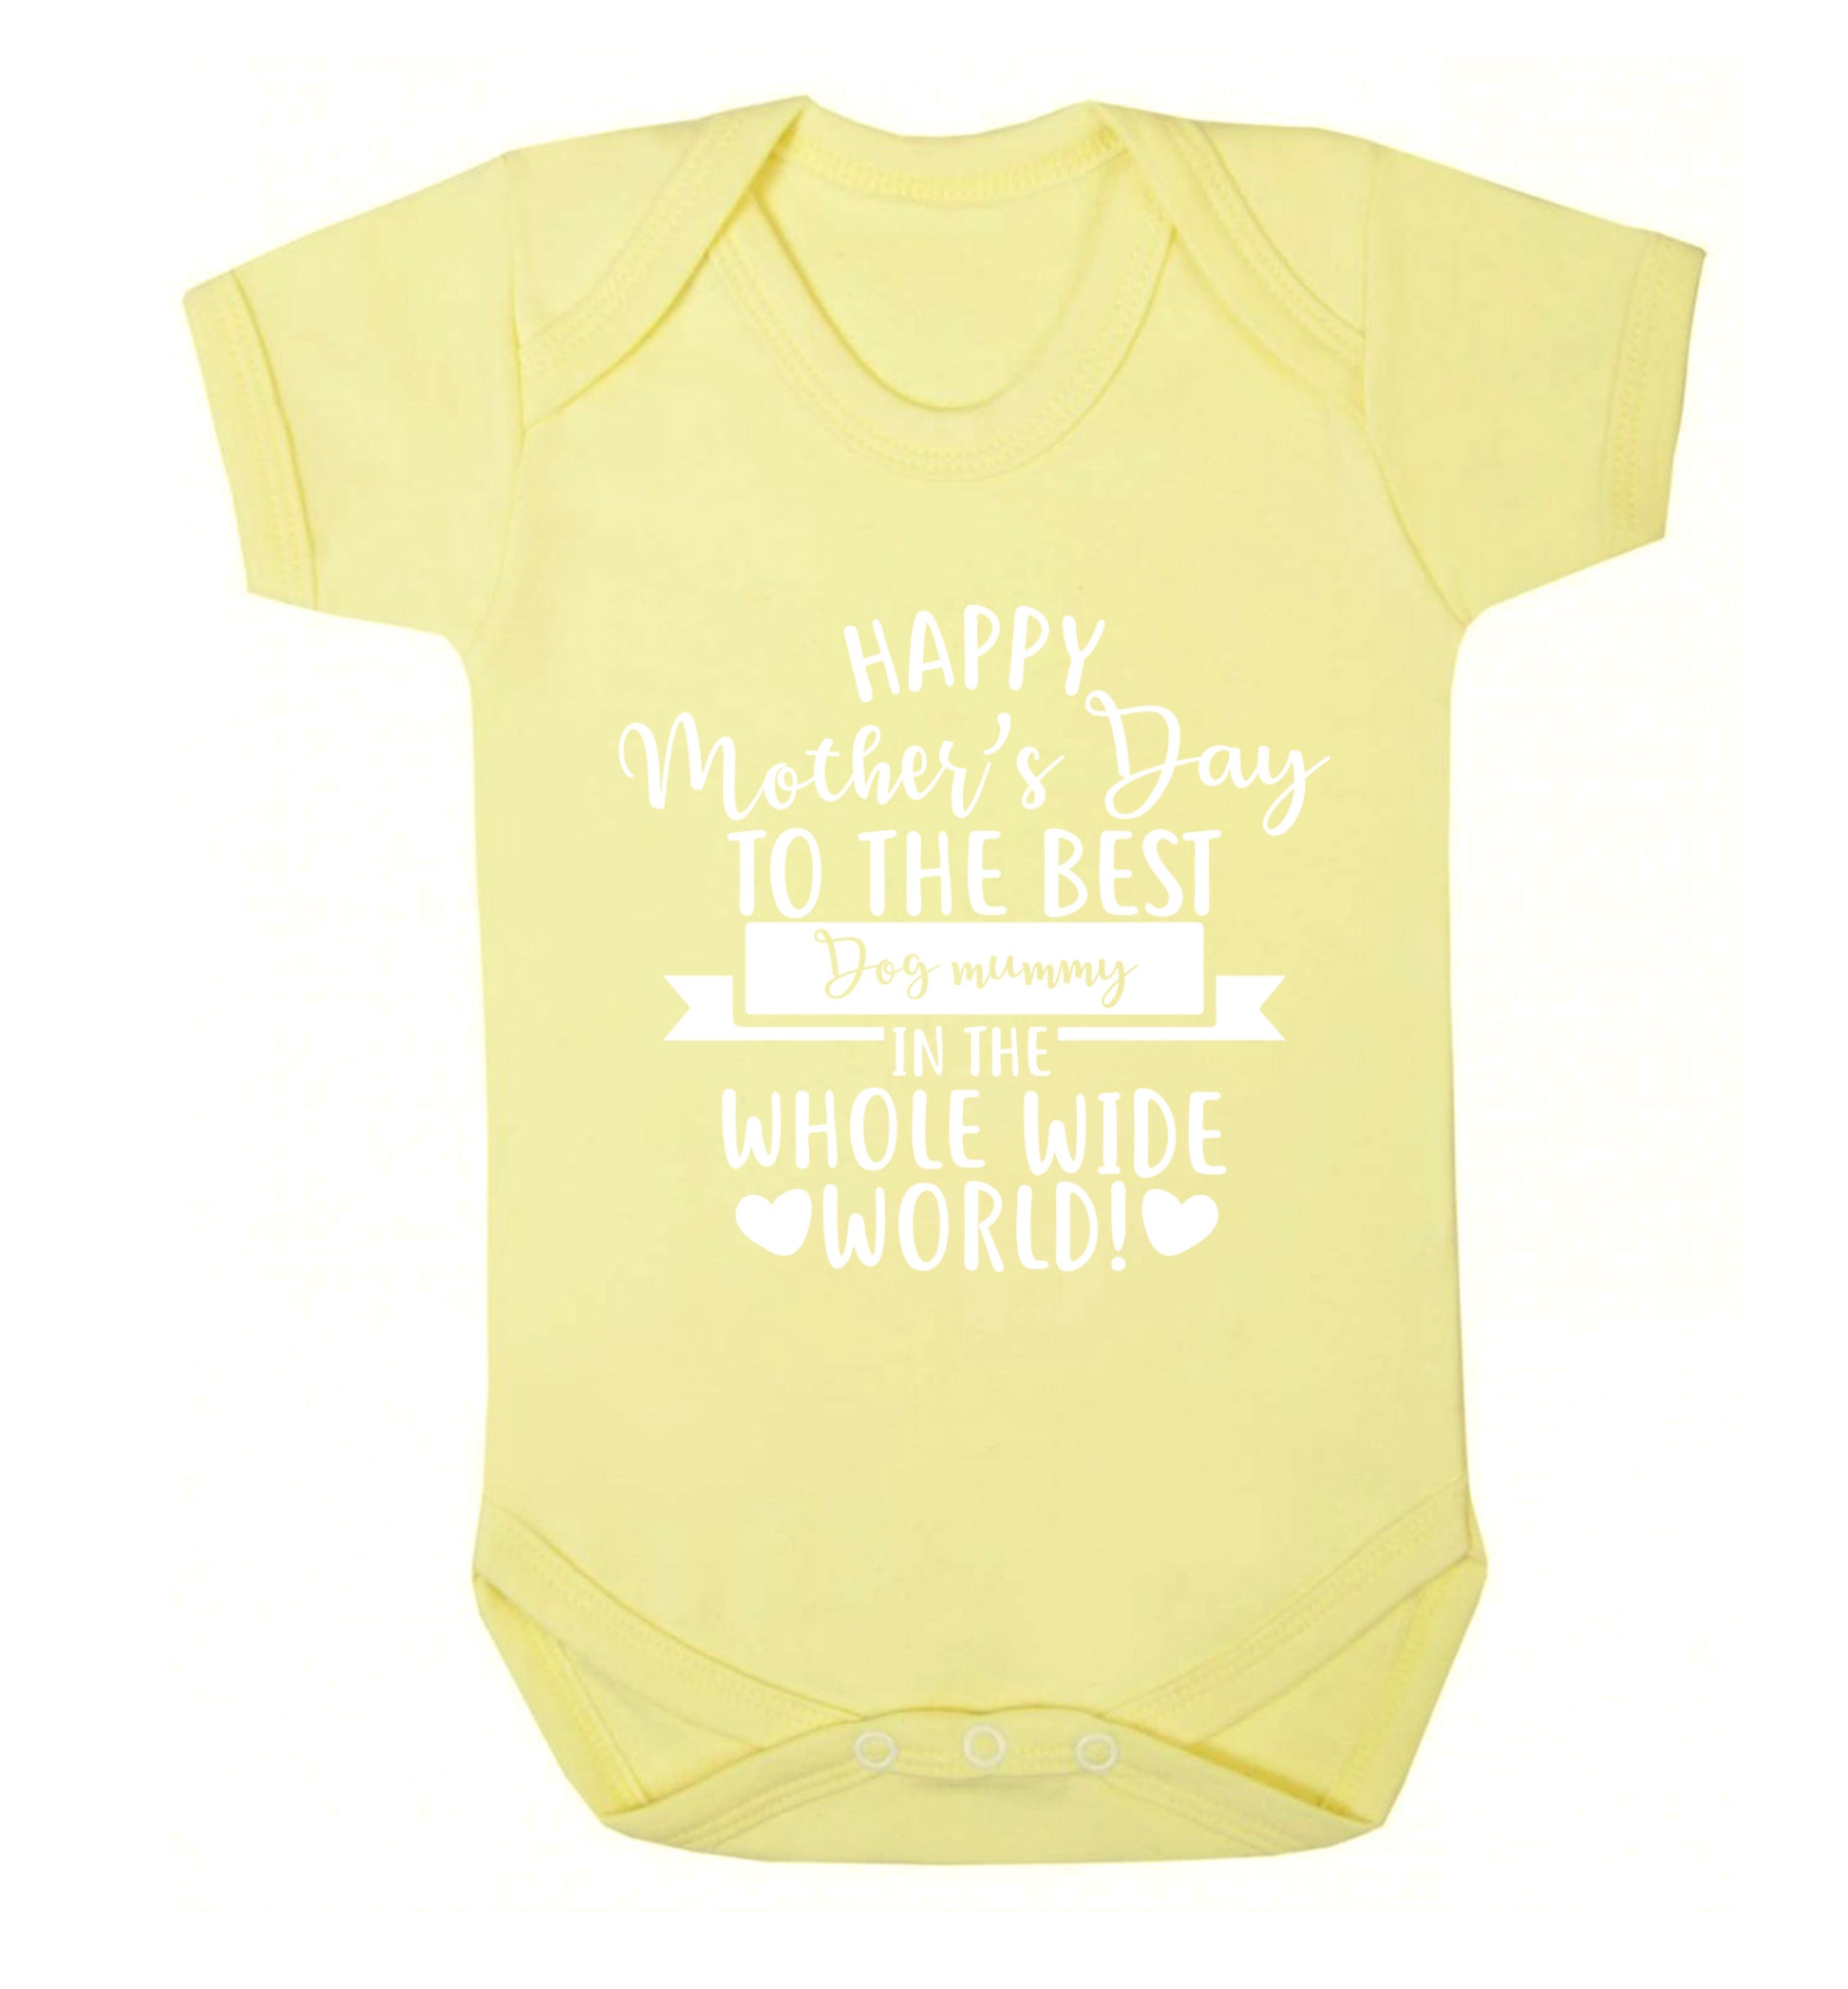 Happy mother's day to the best dog mummy in the world Baby Vest pale yellow 18-24 months